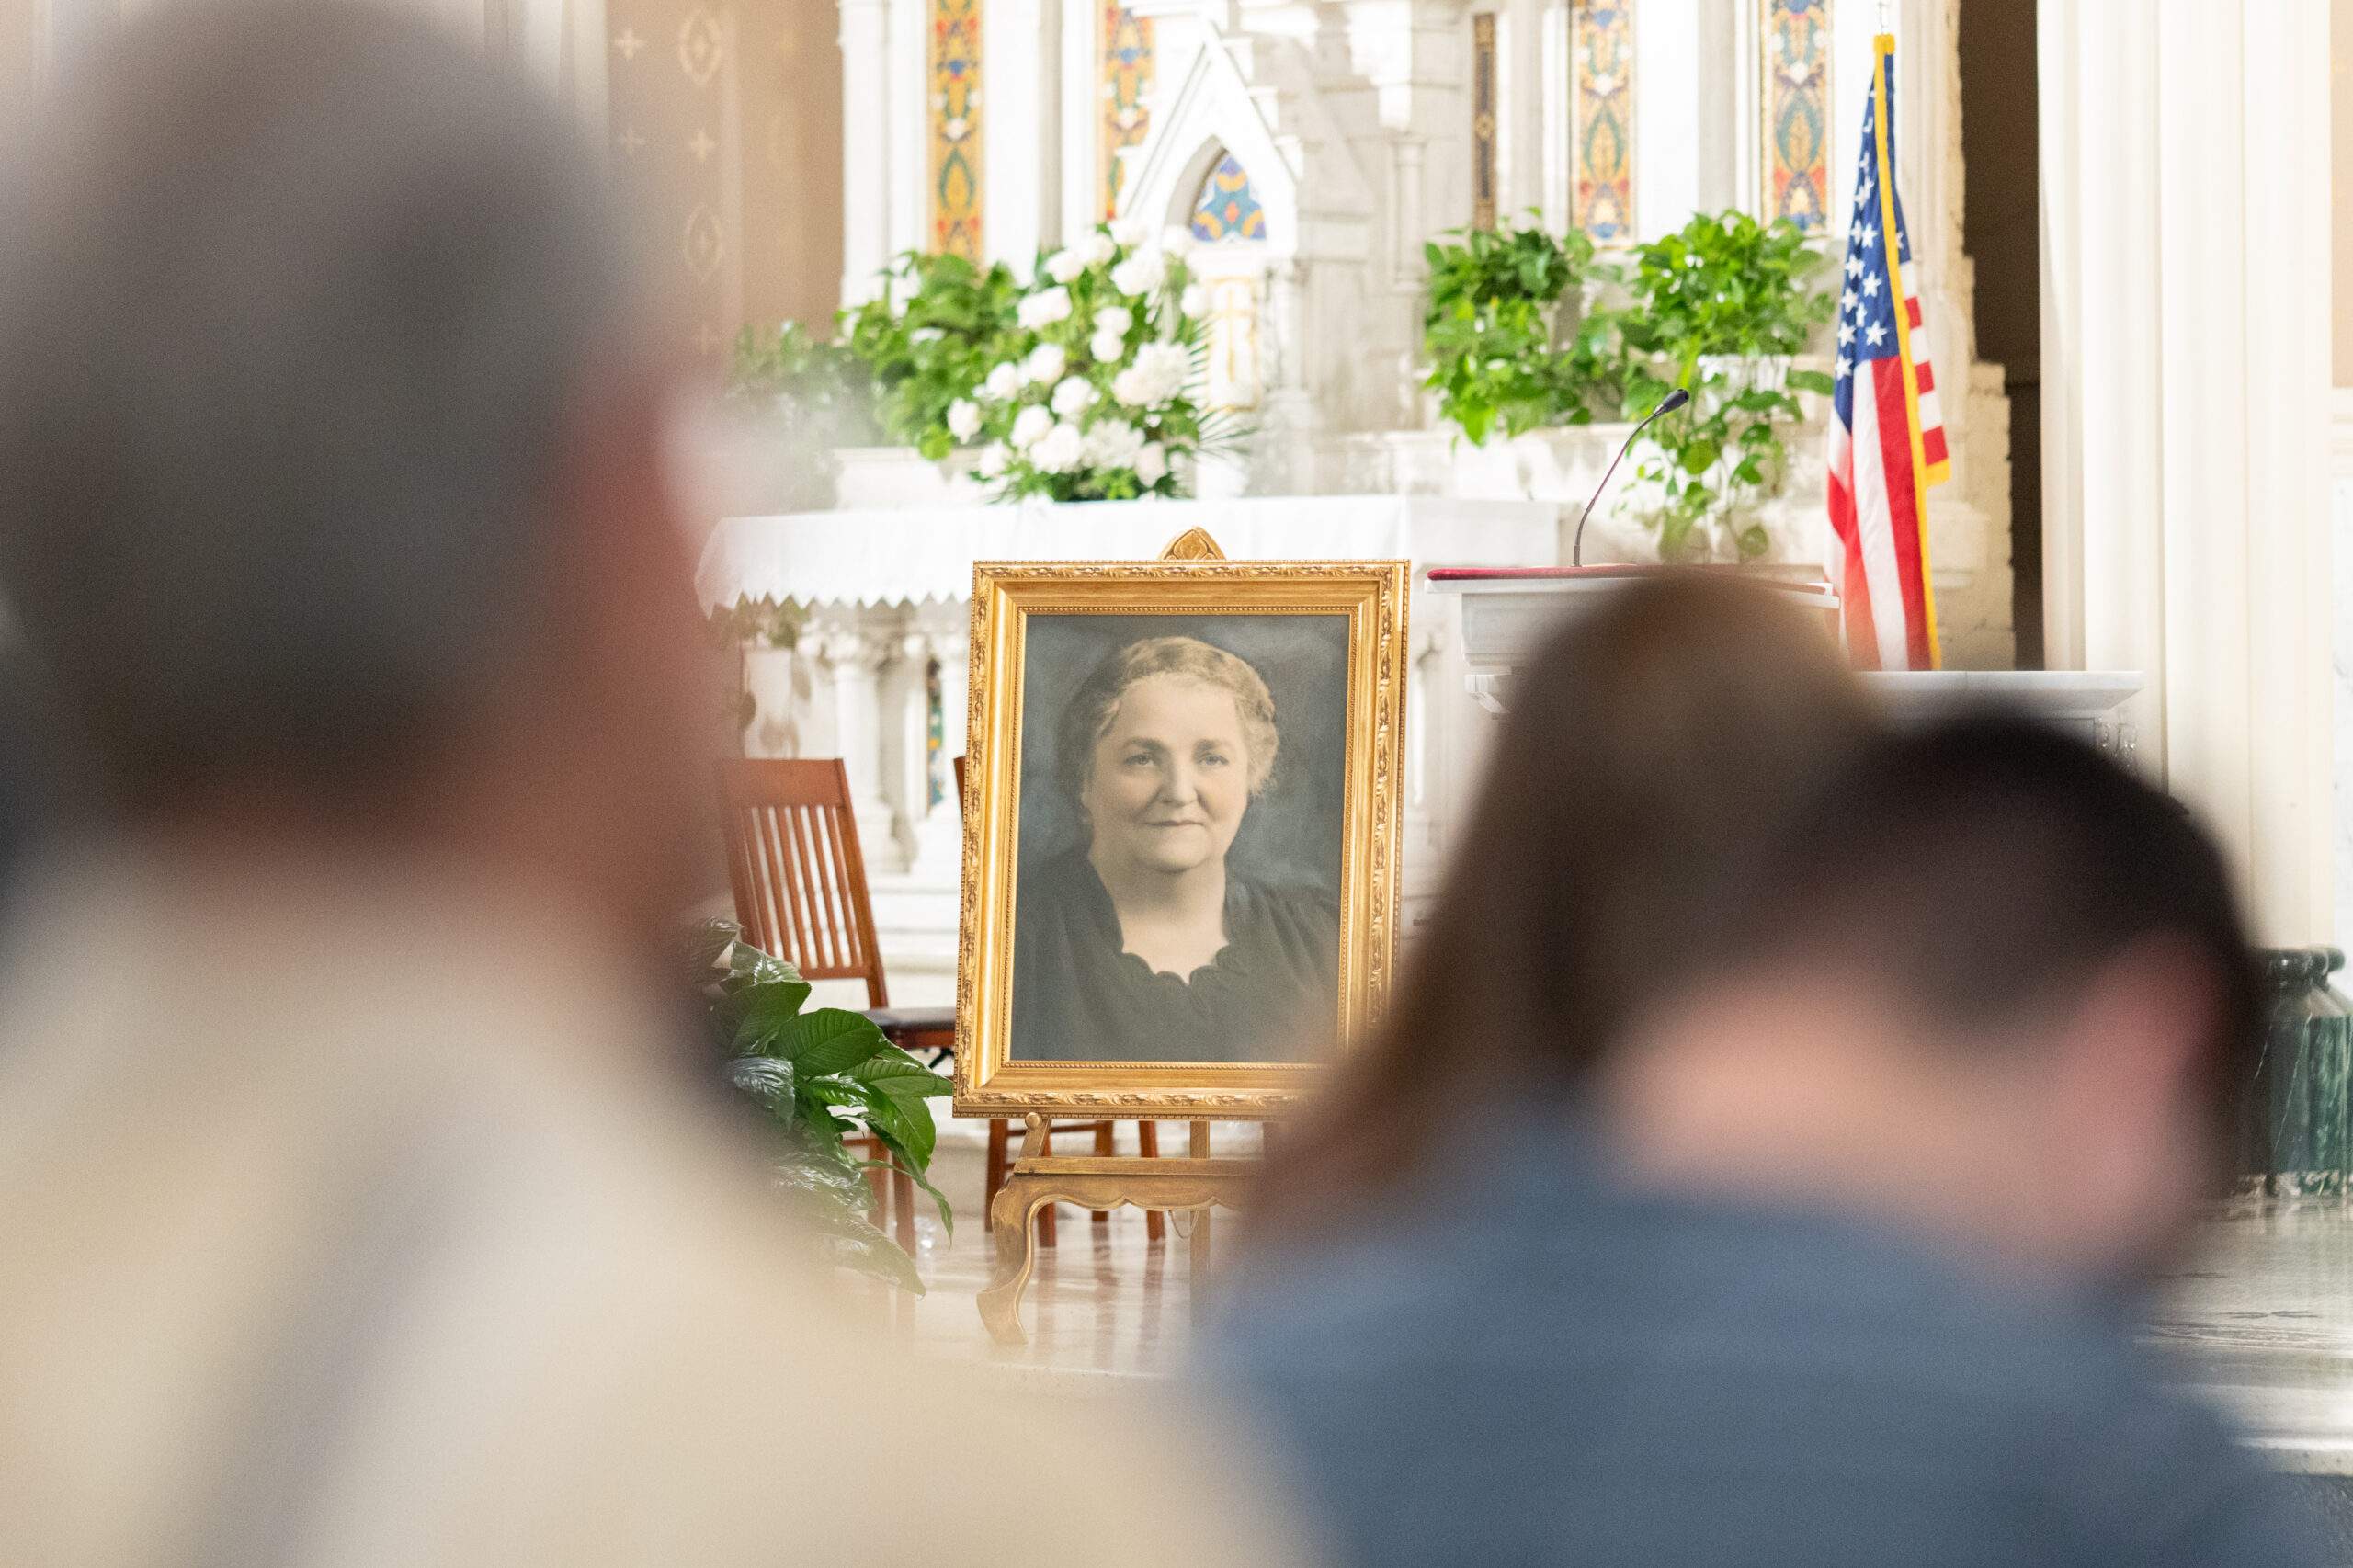 Image of Rhoda Wise displayed on the altar